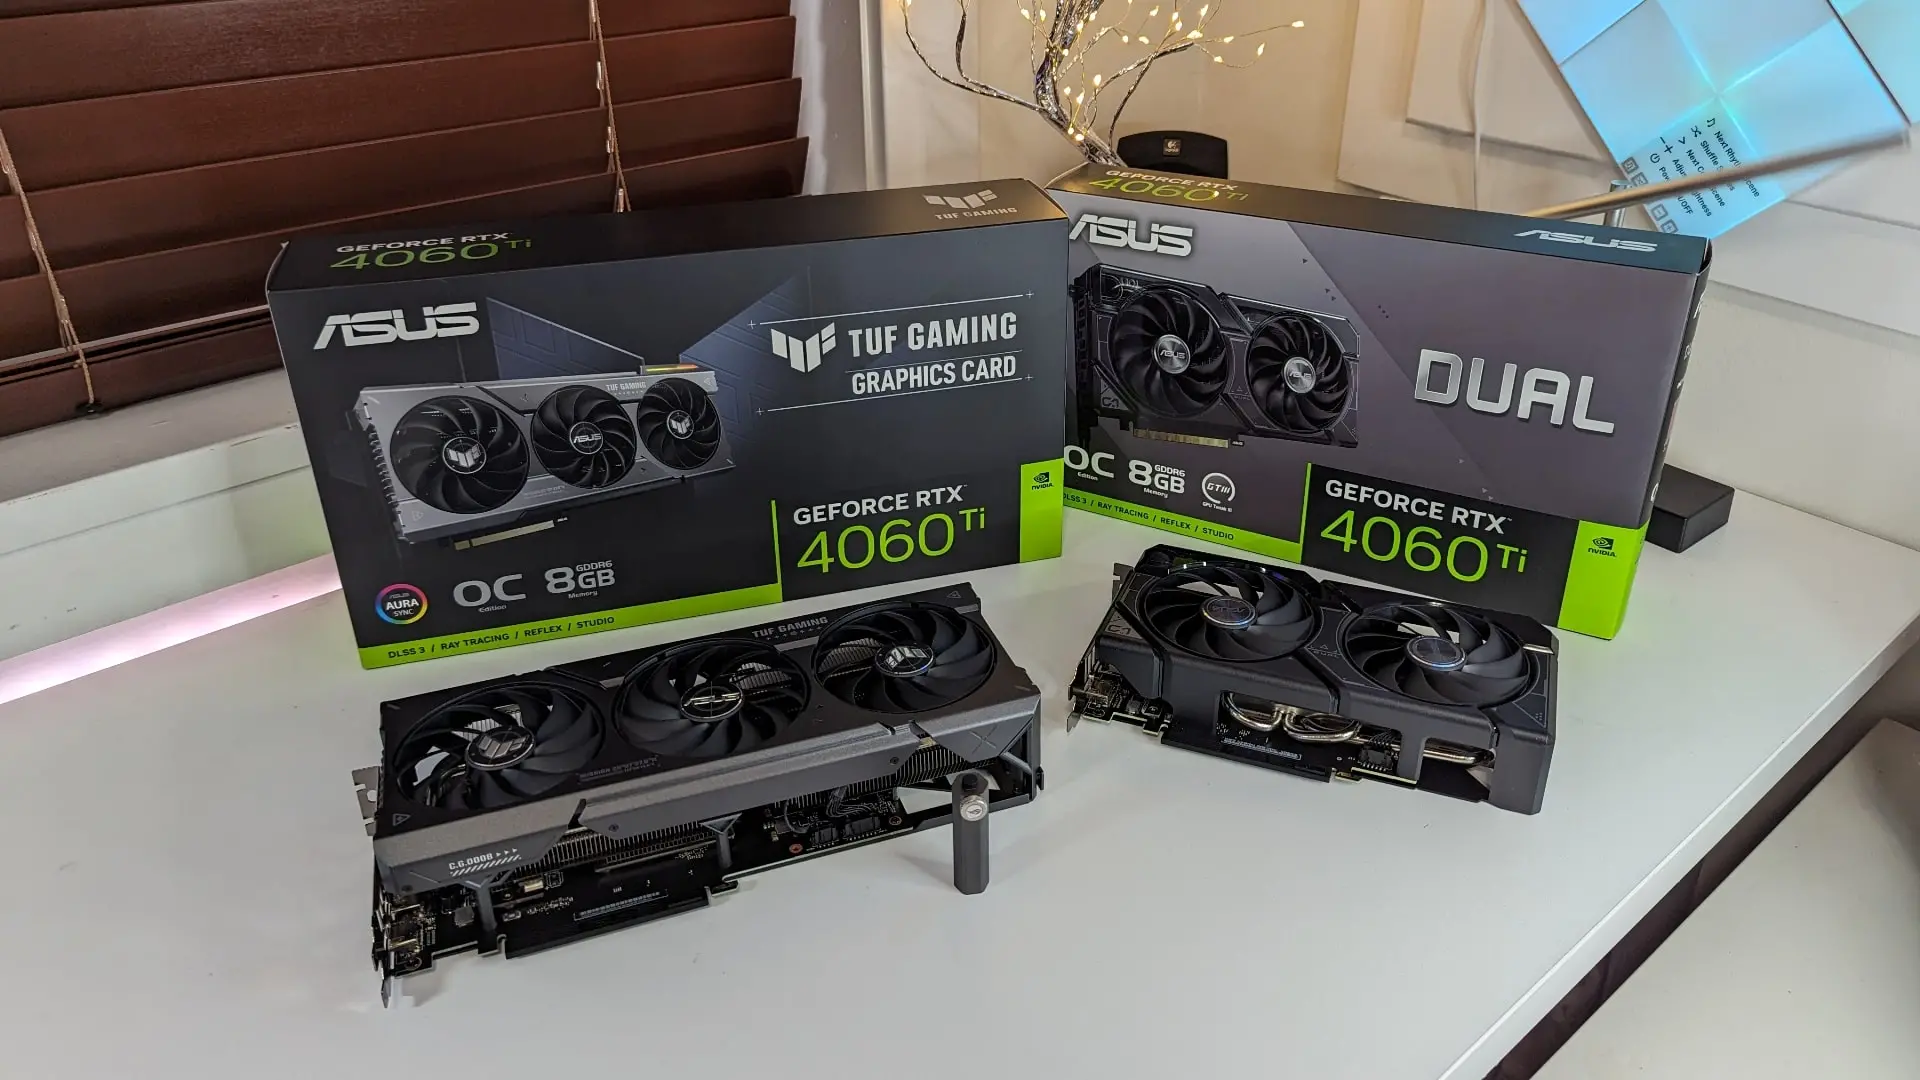 ASUS GeForce RTX 4060 Ti TUF Gaming and Dual graphics cards